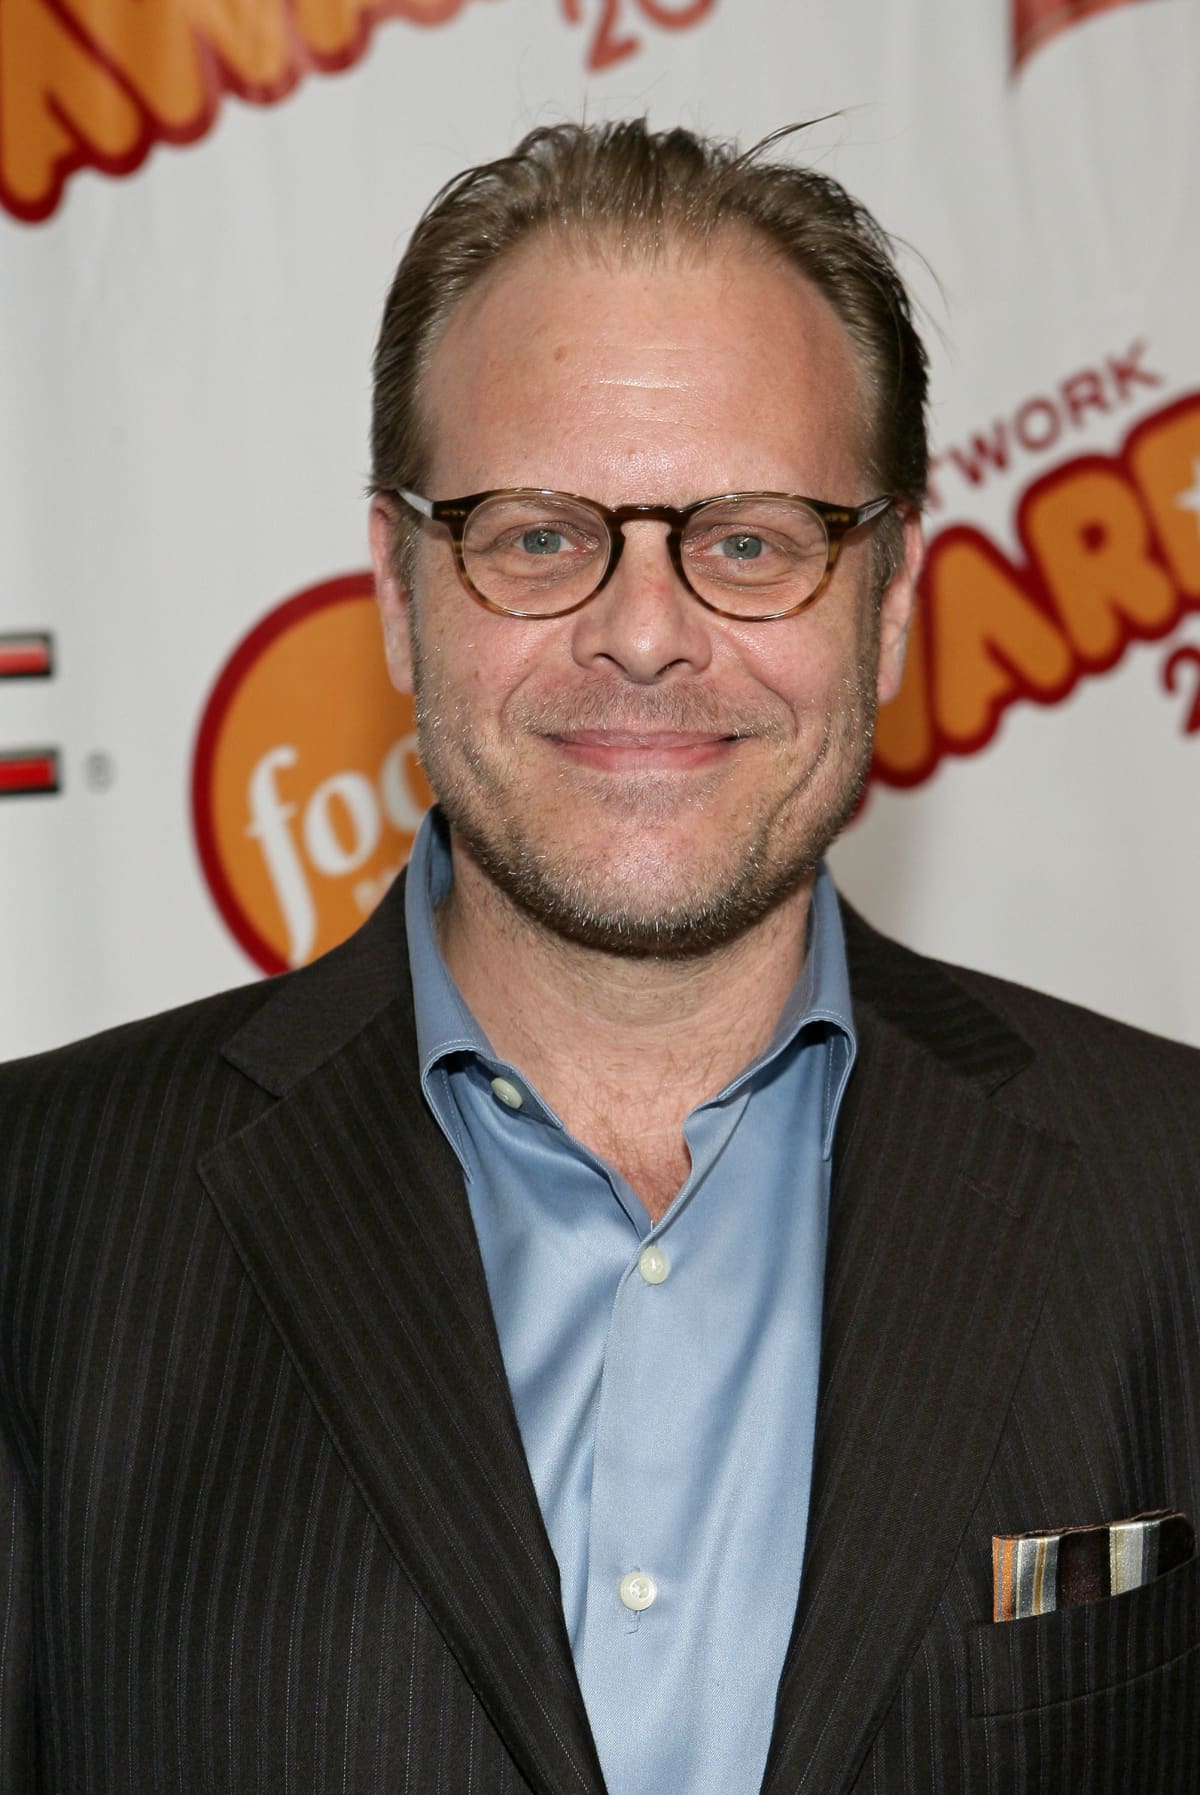 MIAMI BEACH - FEBRUARY 23: Alton Brown poses on the red carpet before the Food Network Awards show on February 23, 2007 in Miami Beach, Florida. (Photo by Alexander Tamargo/Getty Images)